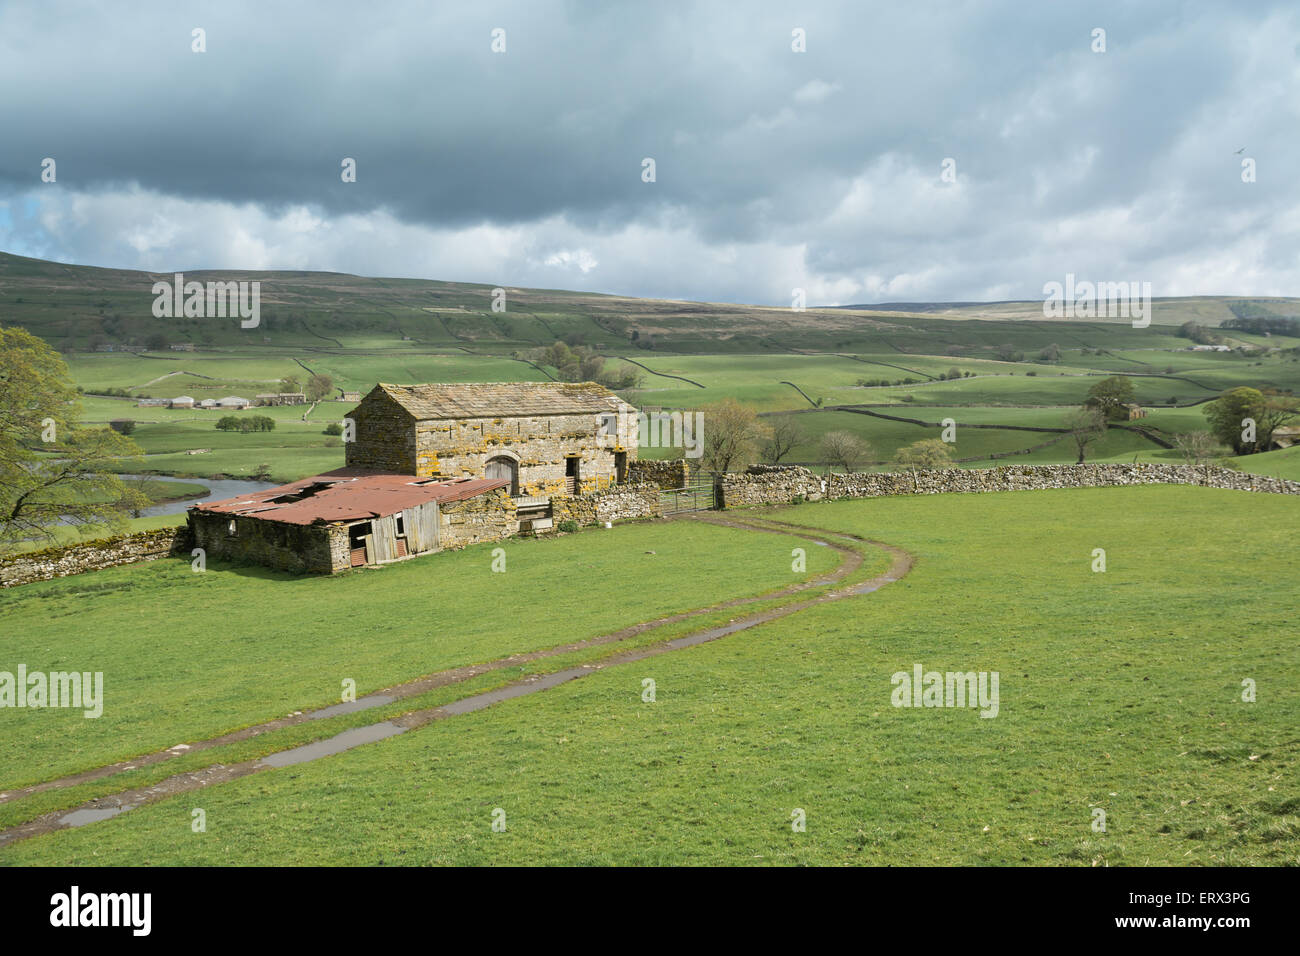 Stone barn and views in Wensleydale in the Yorkshire Dales Stock Photo